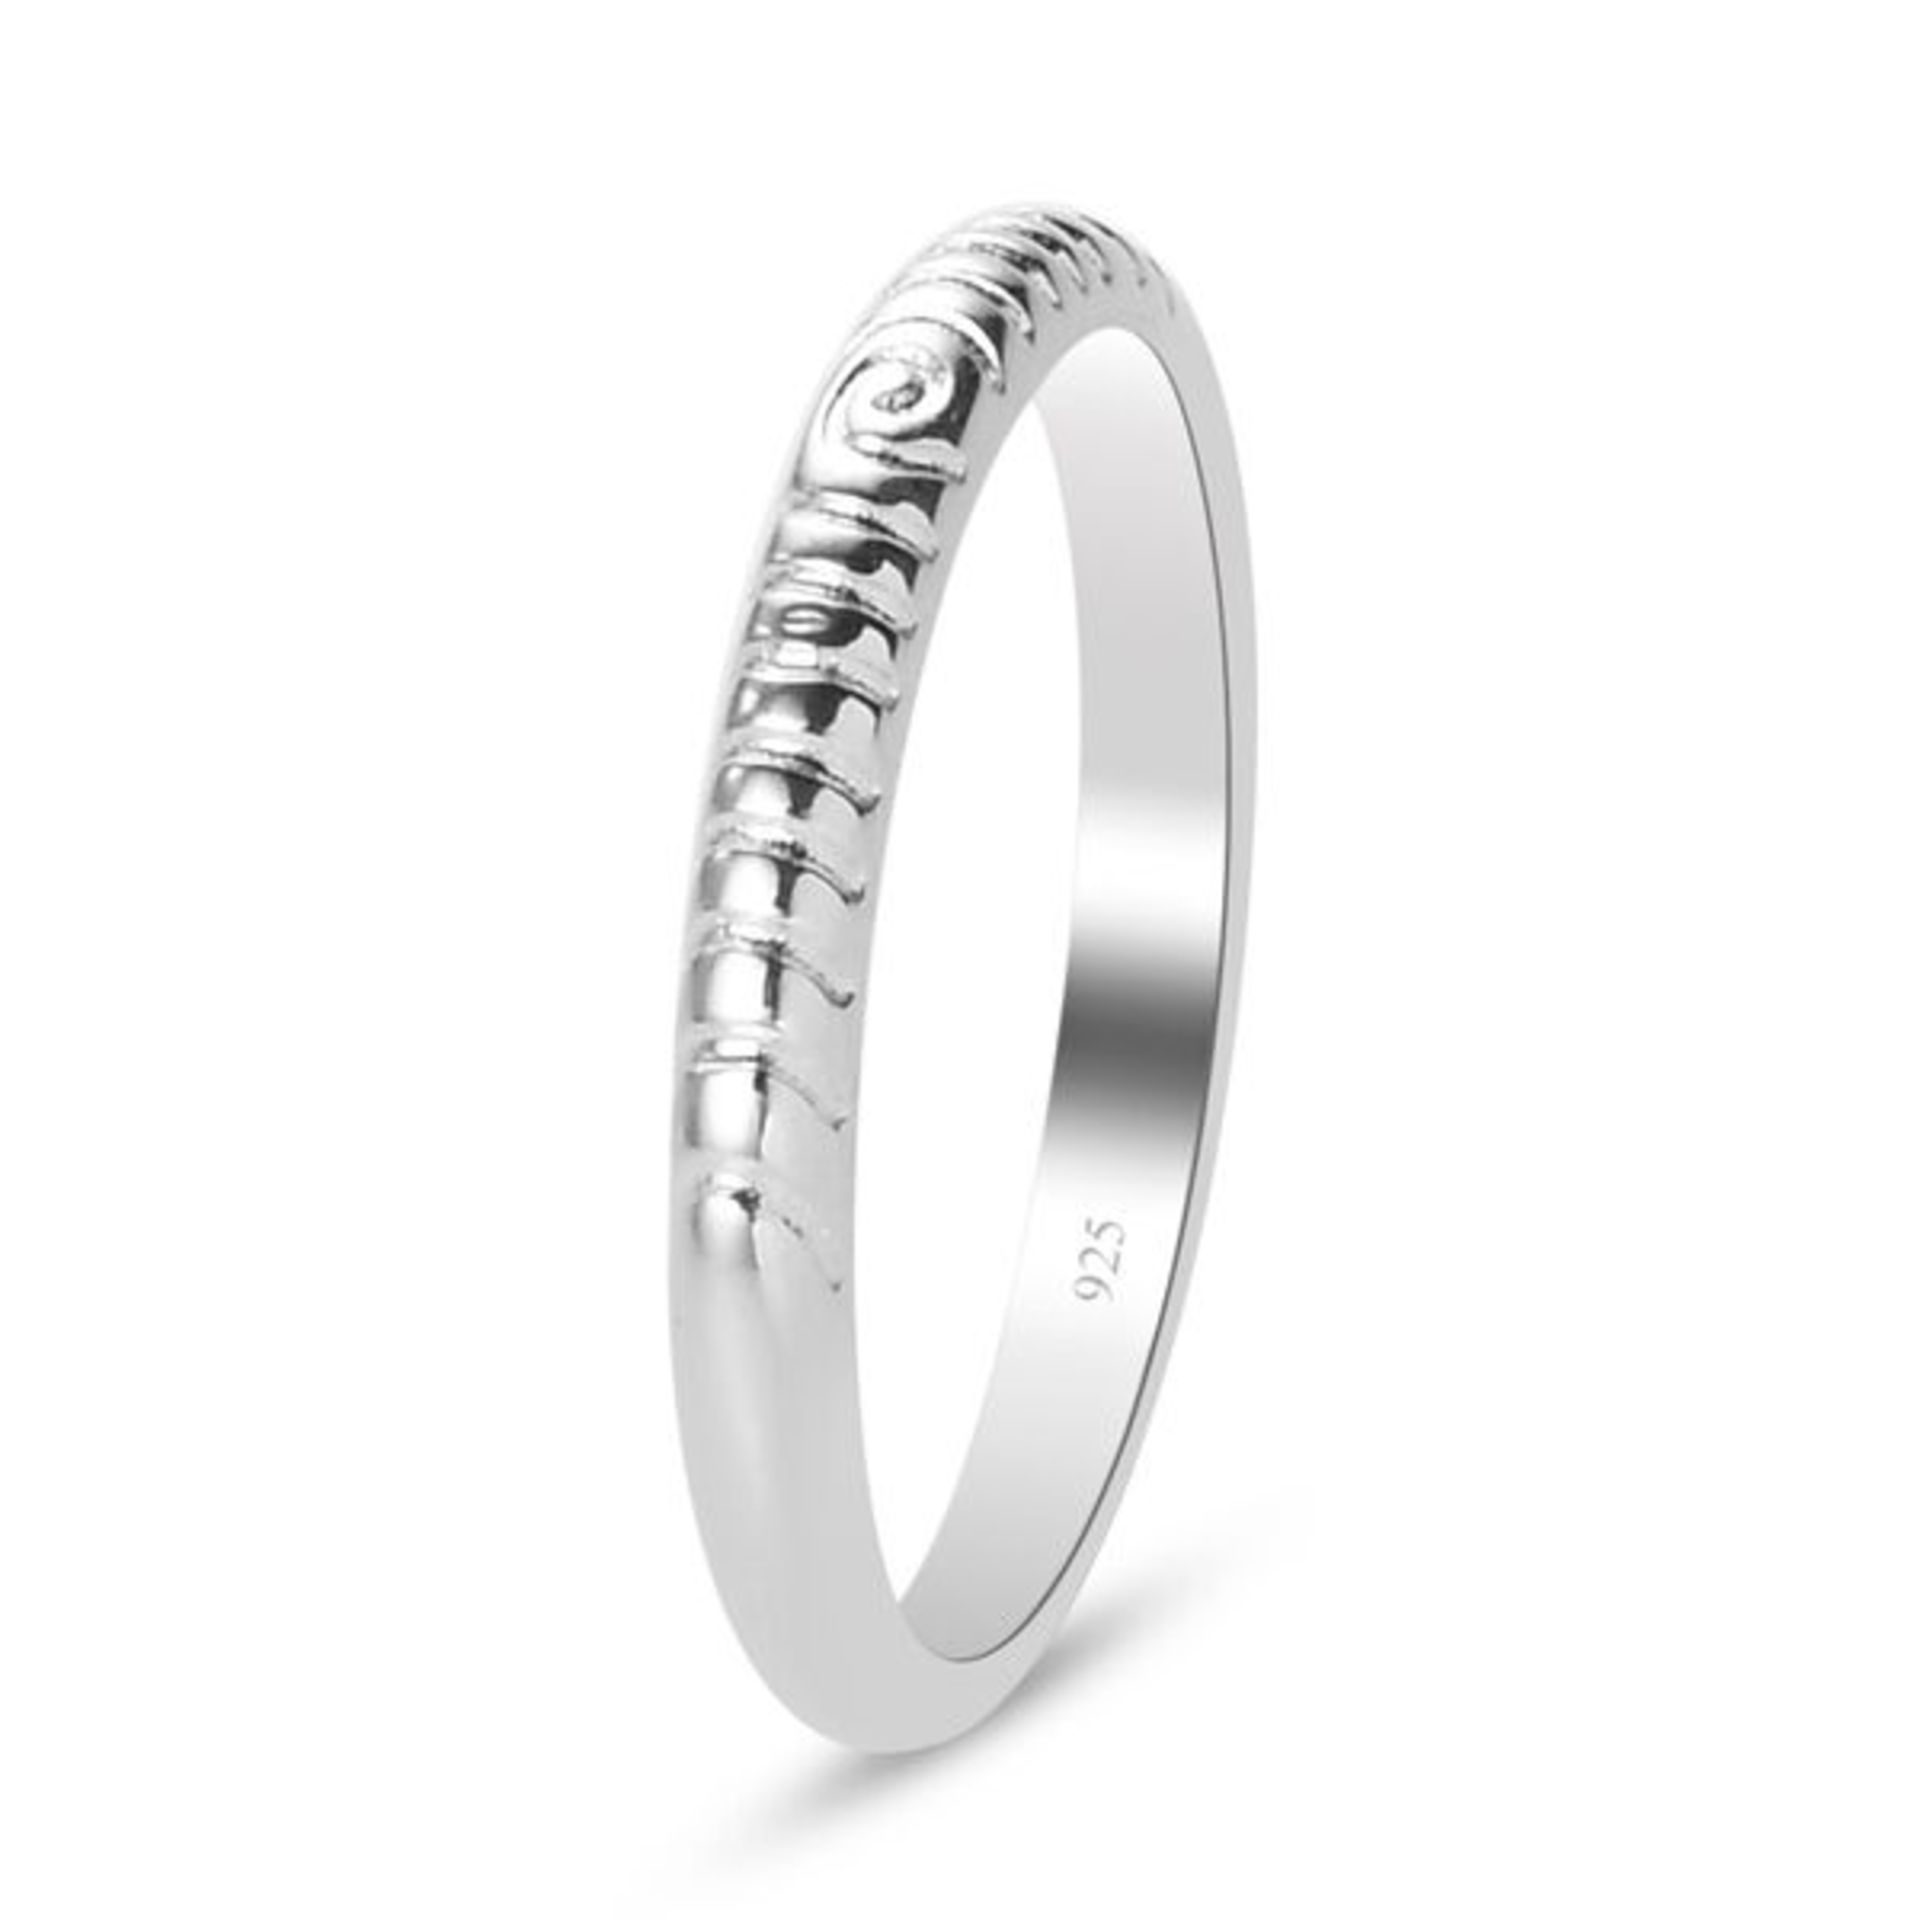 NEW!! Sterling Silver Band Ring - Image 2 of 3